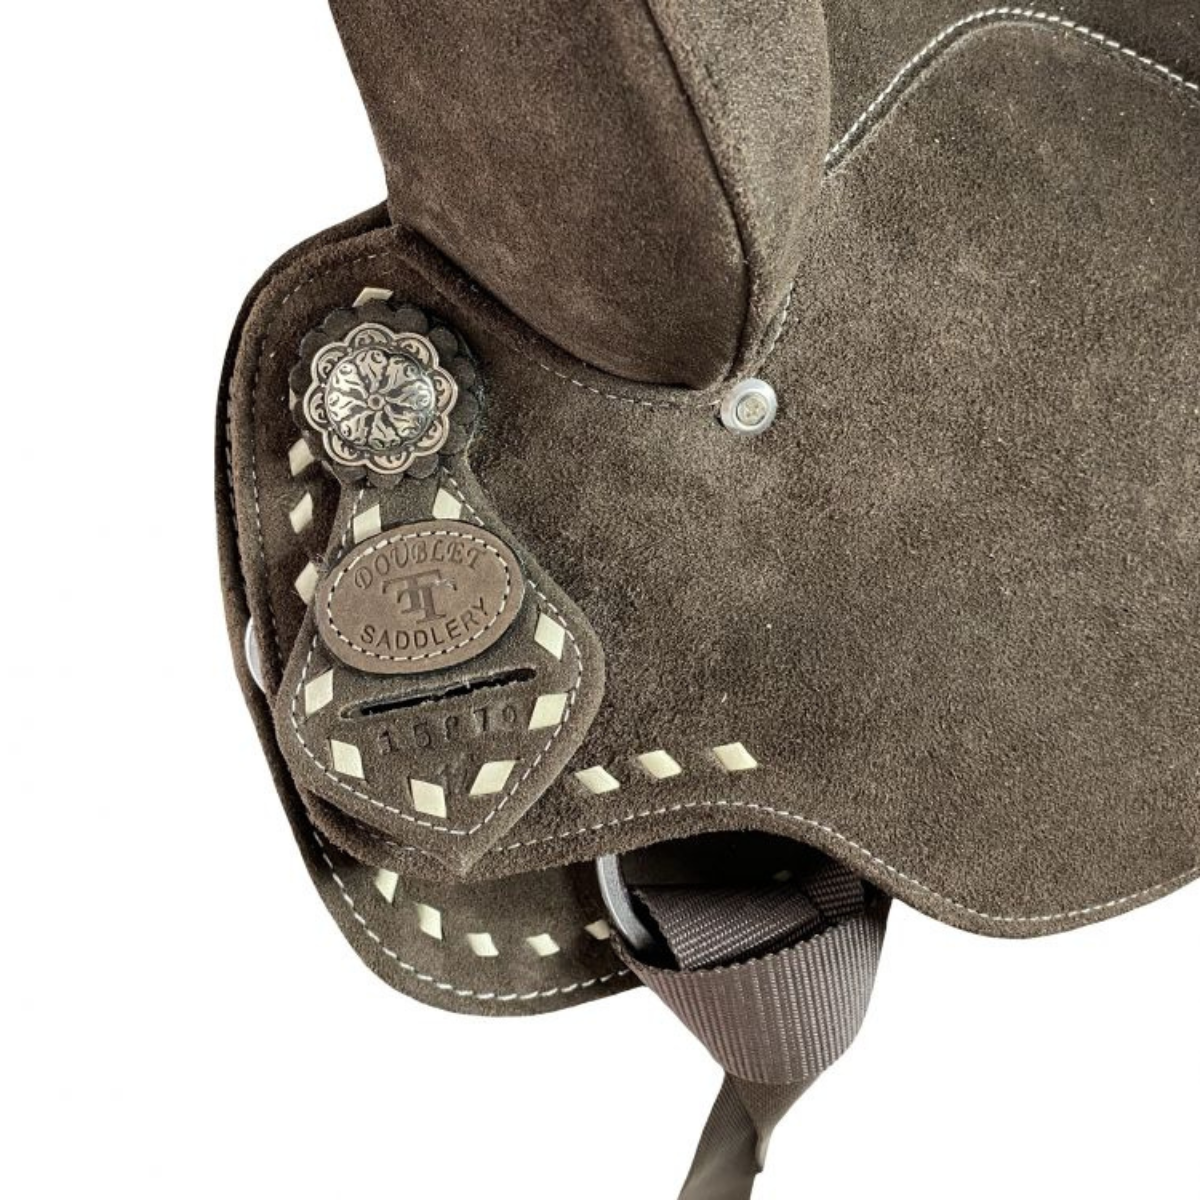 12" Double T Barrel style saddle with Dark Brown Rough out leather - Double T Saddles